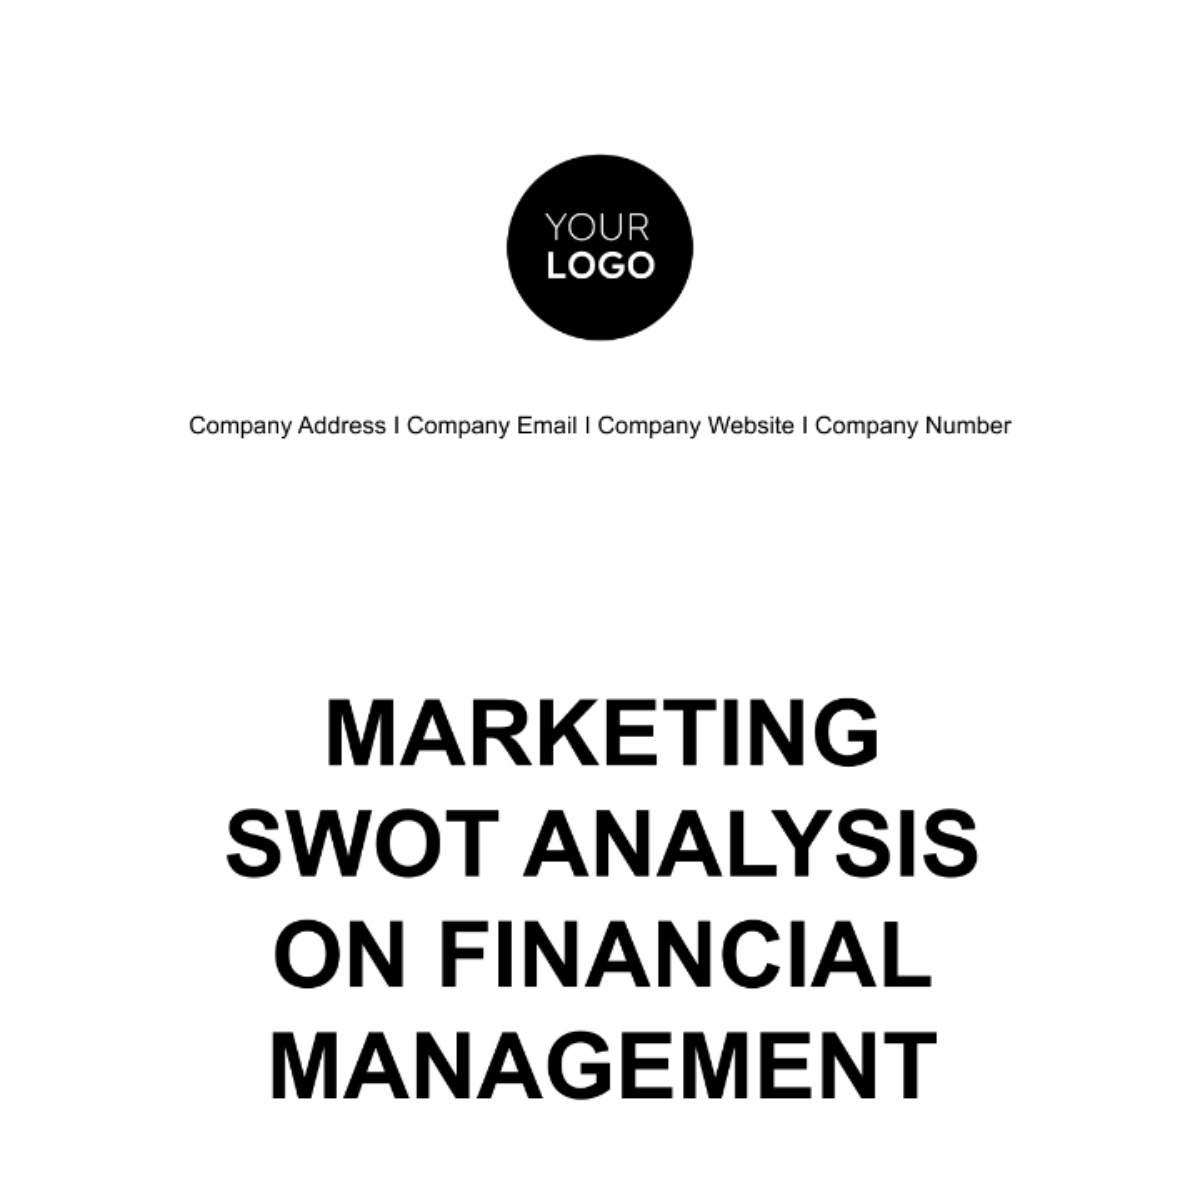 Marketing SWOT Analysis on Financial Management Template